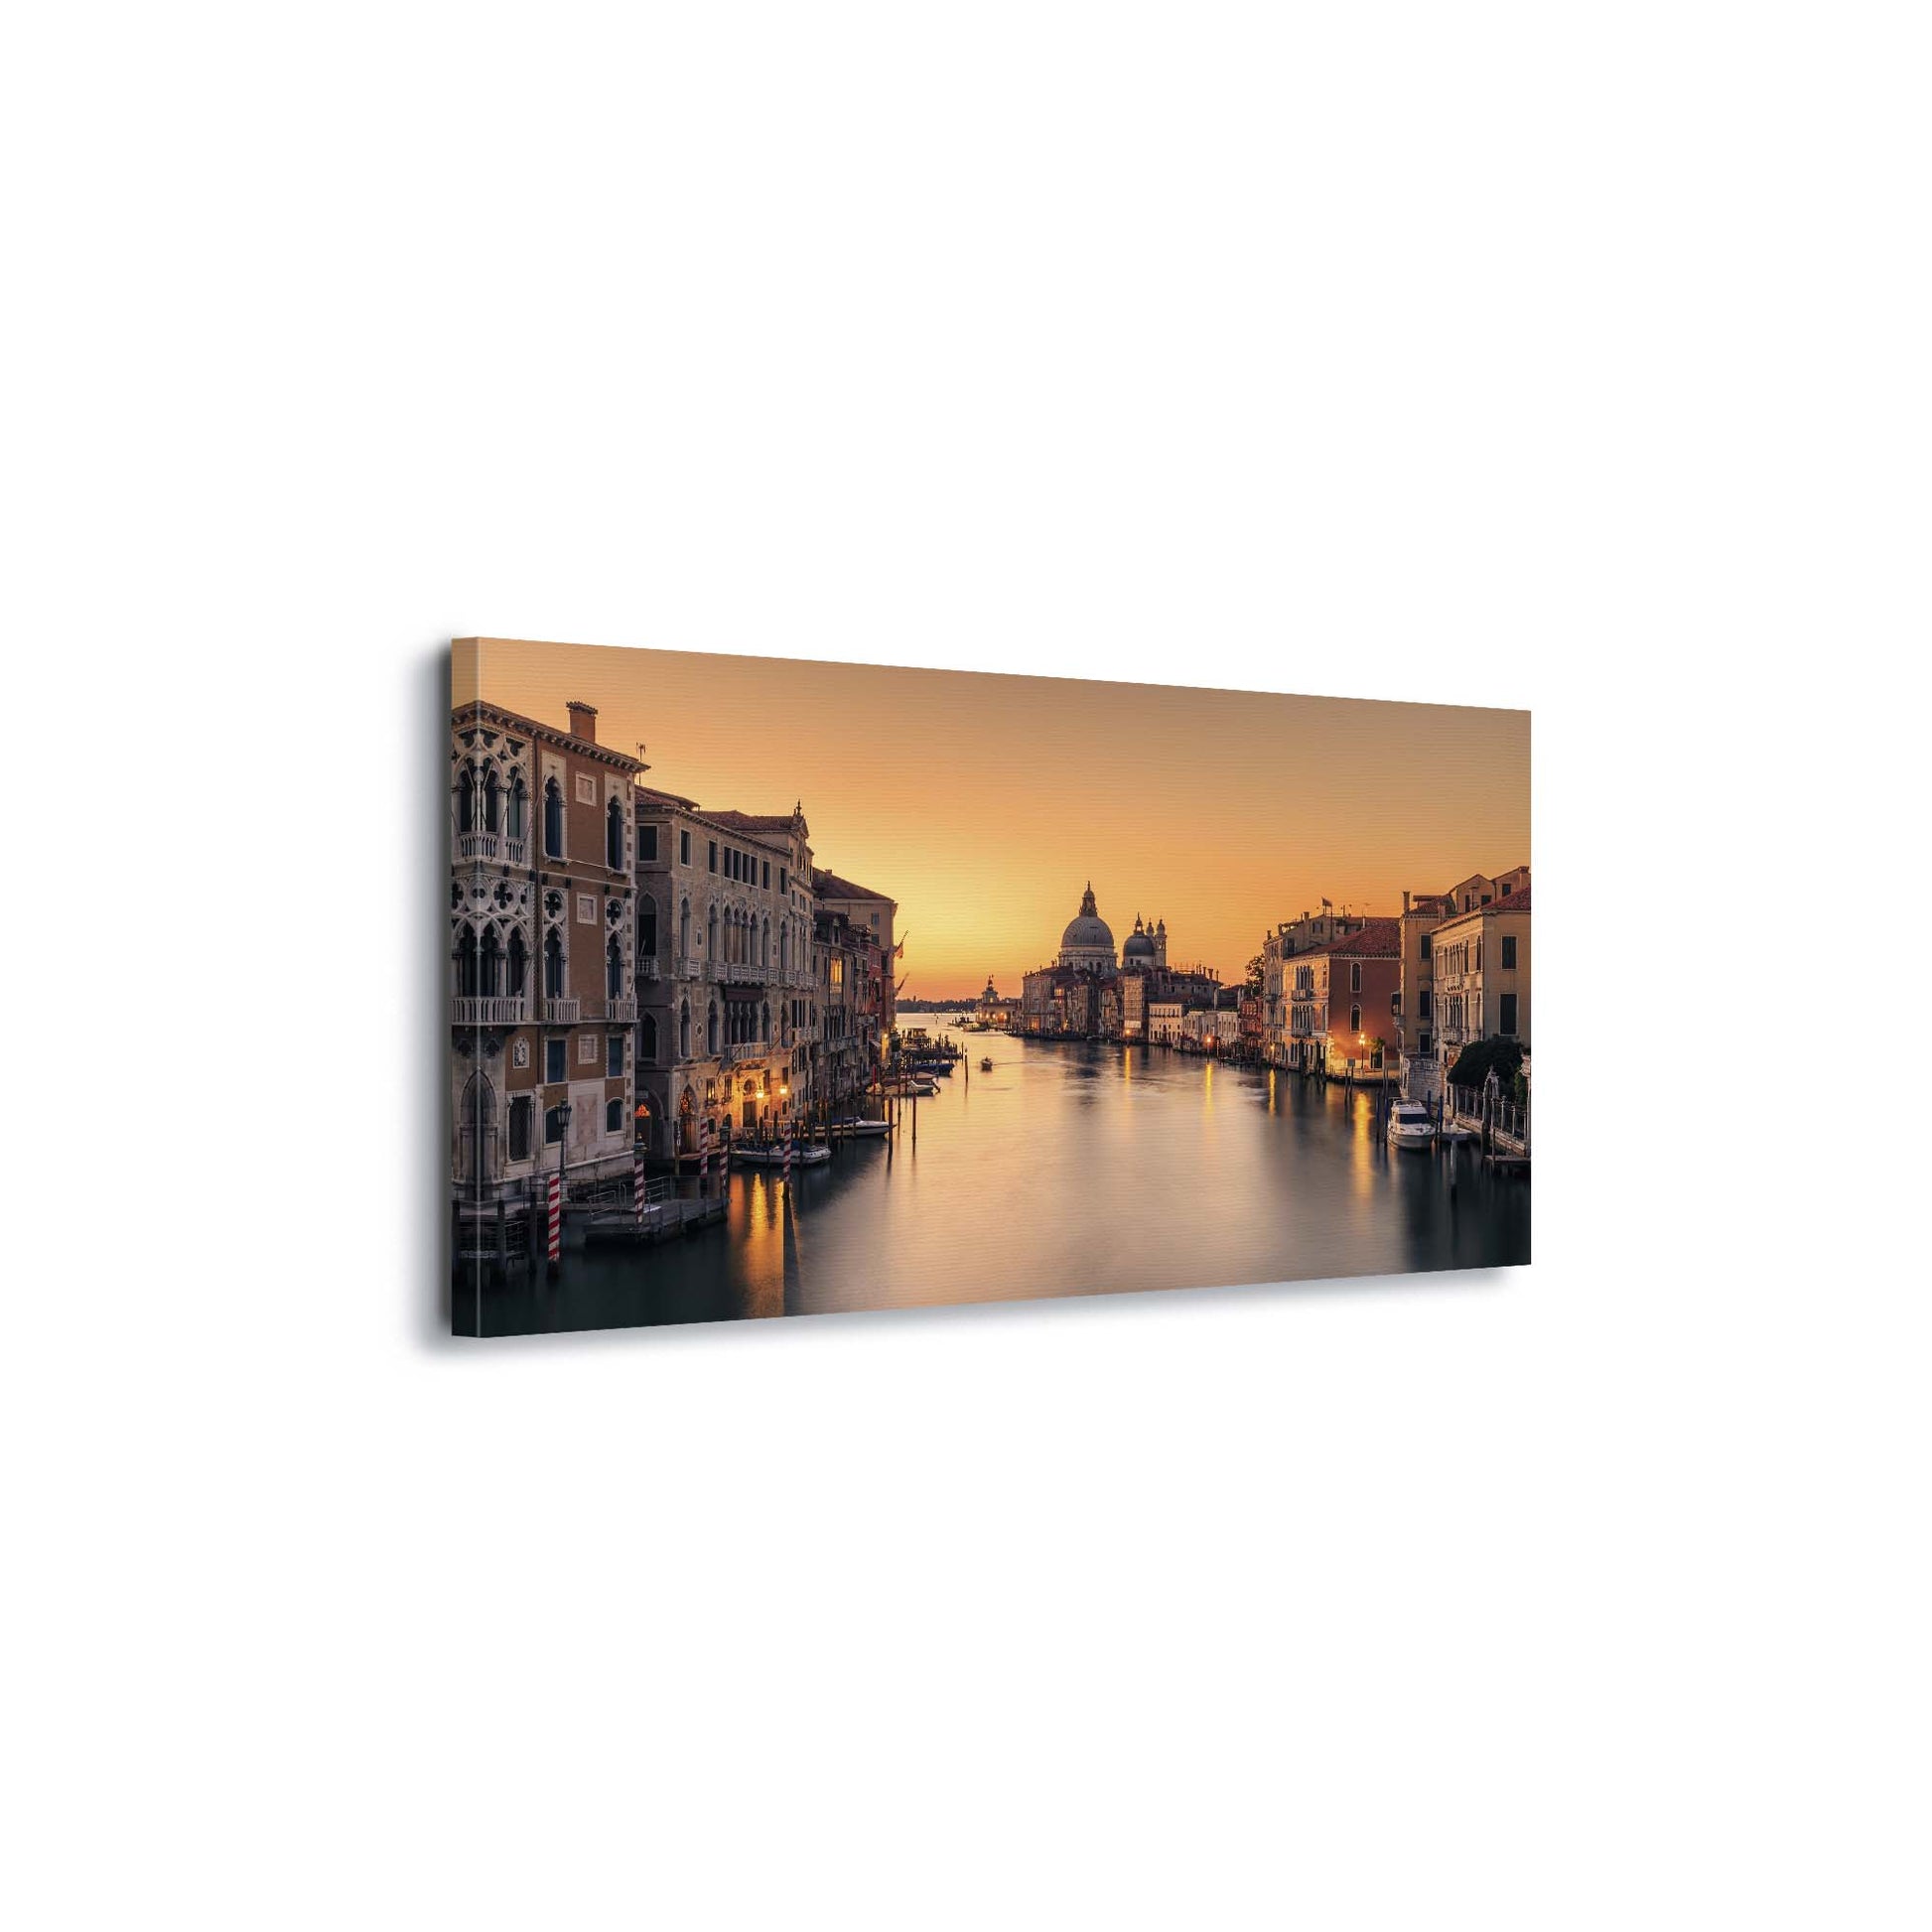 Dawn on Venice by Eric Zhang Canvas Print - USTAD HOME